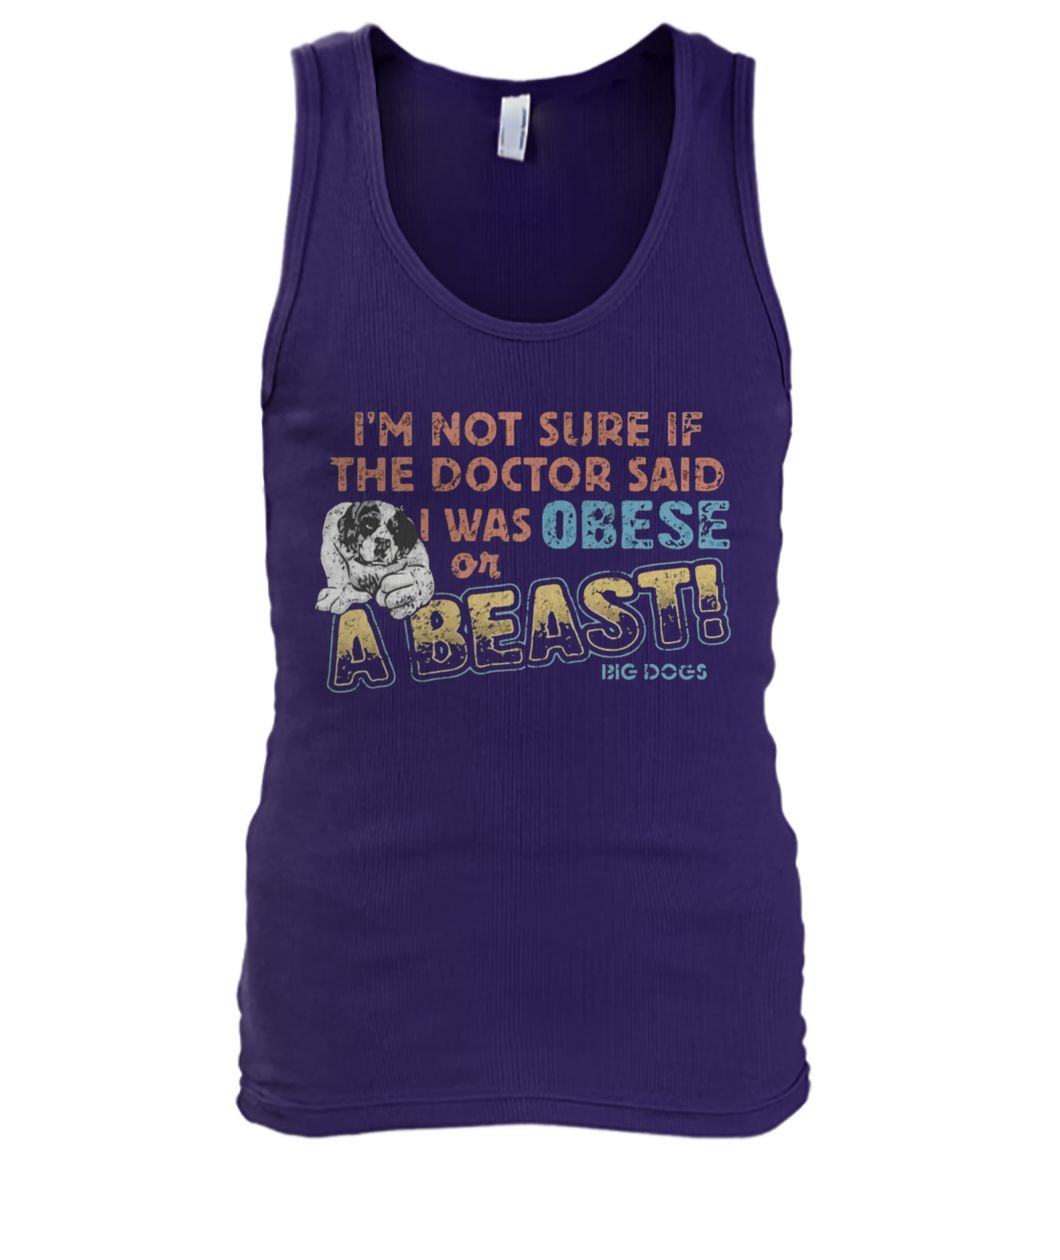 I'm not sure if the doctor said I was obese or a beast big dogs men's tank top